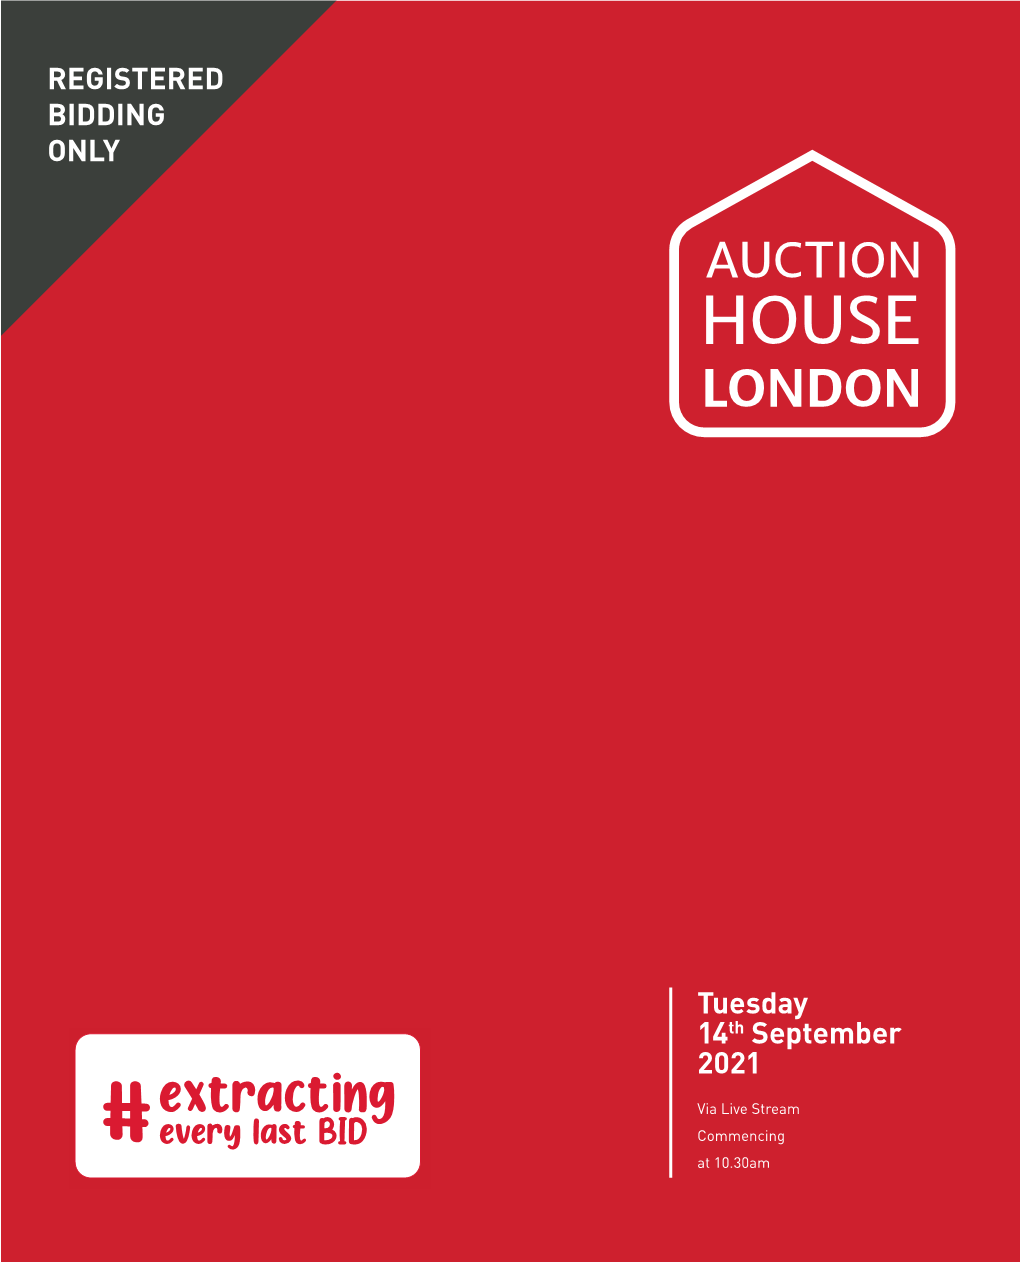 AH London Front Editorial.Indd 1 25/08/2021 17:21 Auction House London 2021 Auction Schedule